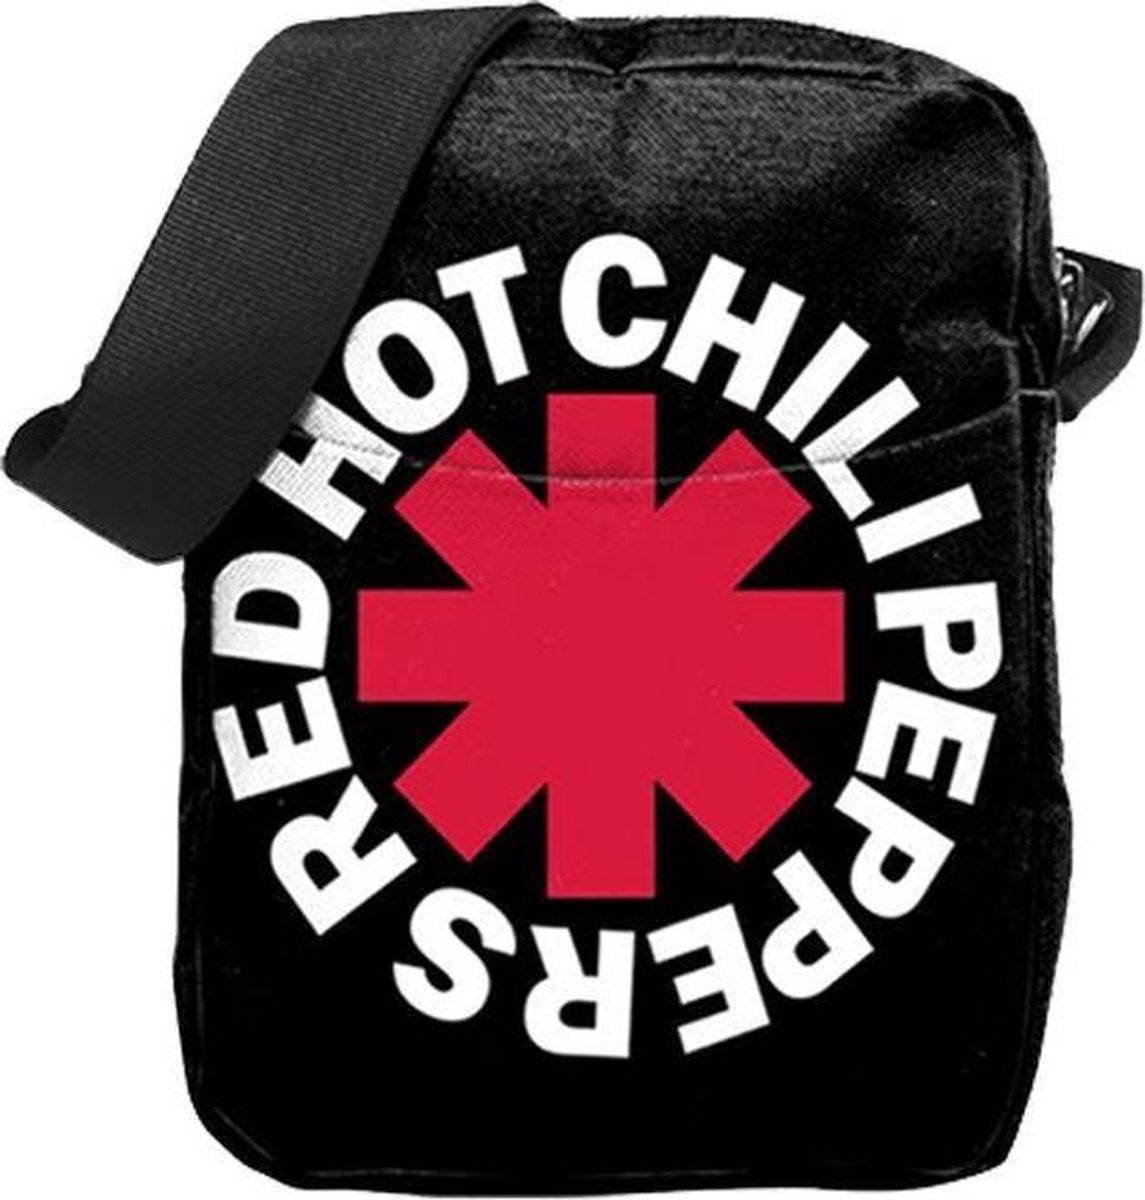 Red Hot Chili Peppers cross body bag - Asterix